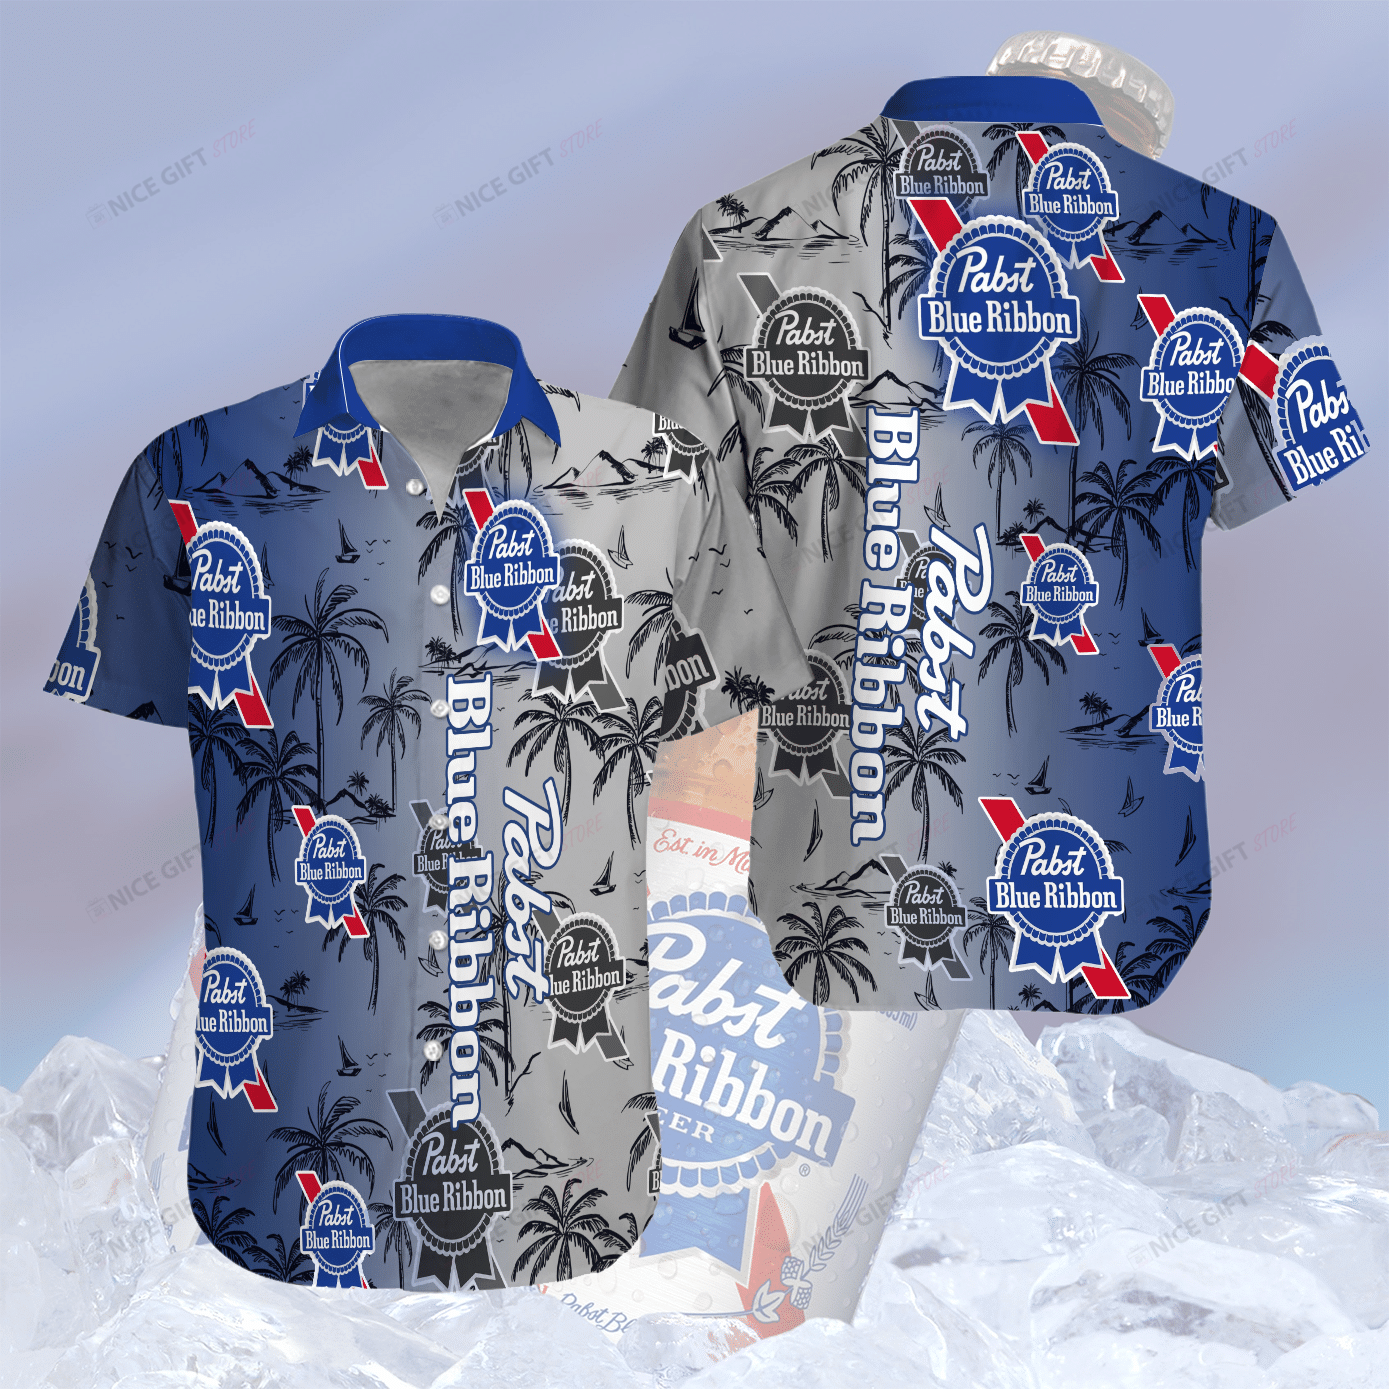 Top Hawaiian Shirt 2022 you'll be happy that you bought them in advance 12